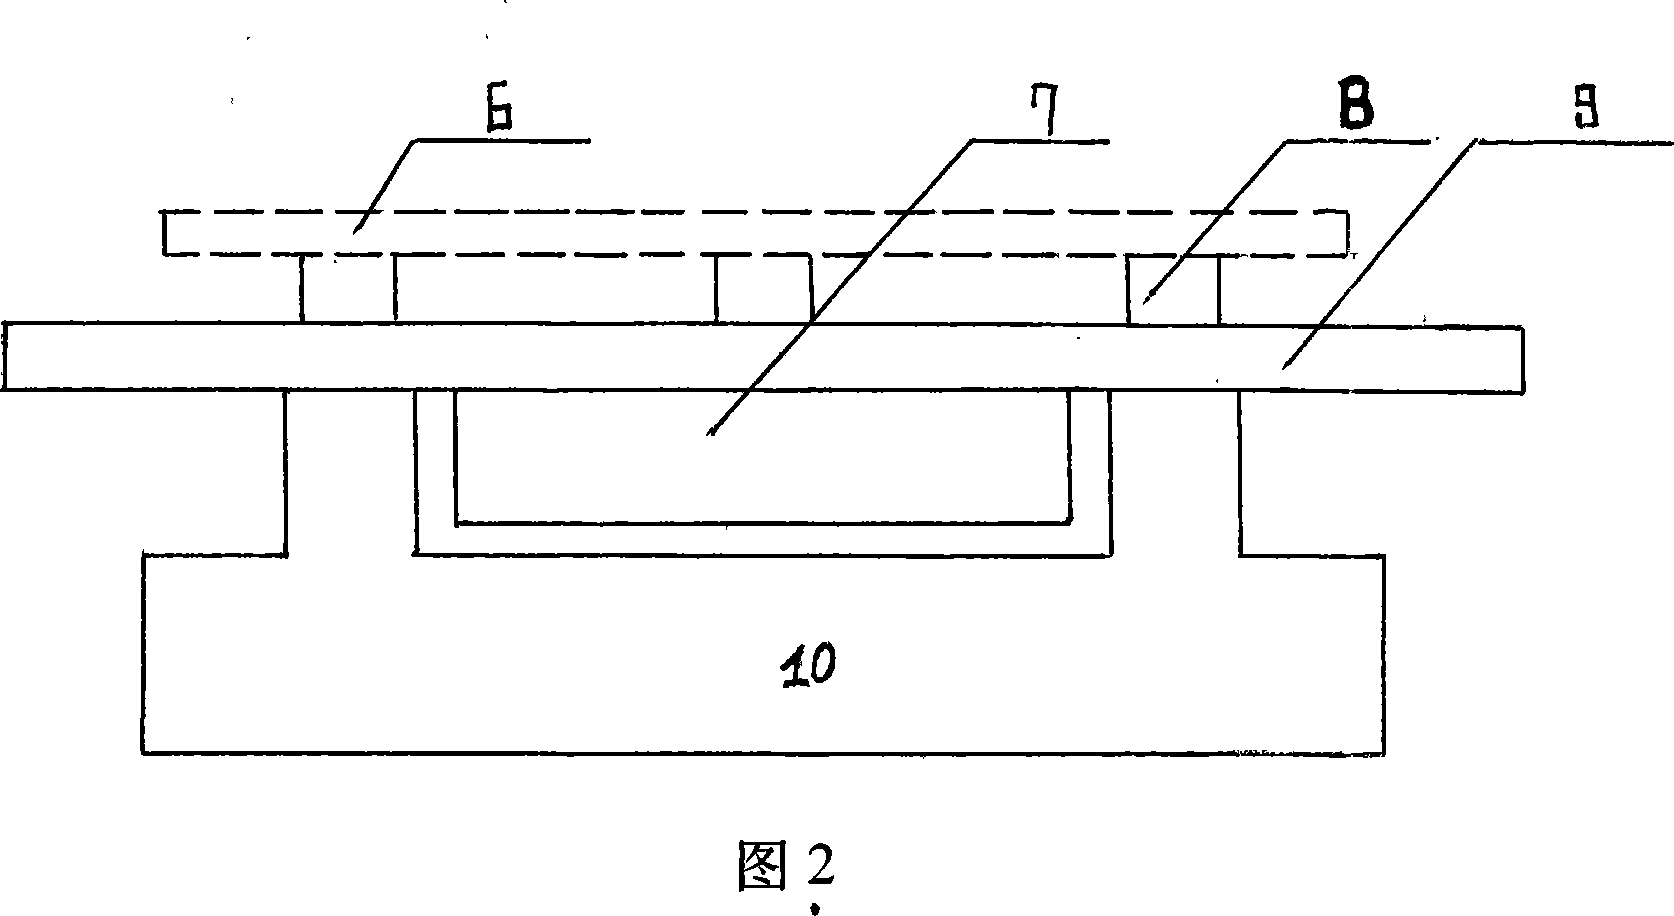 Method for manufacturing ear-plate pin hinged-connection structure of stayed-cable bridge